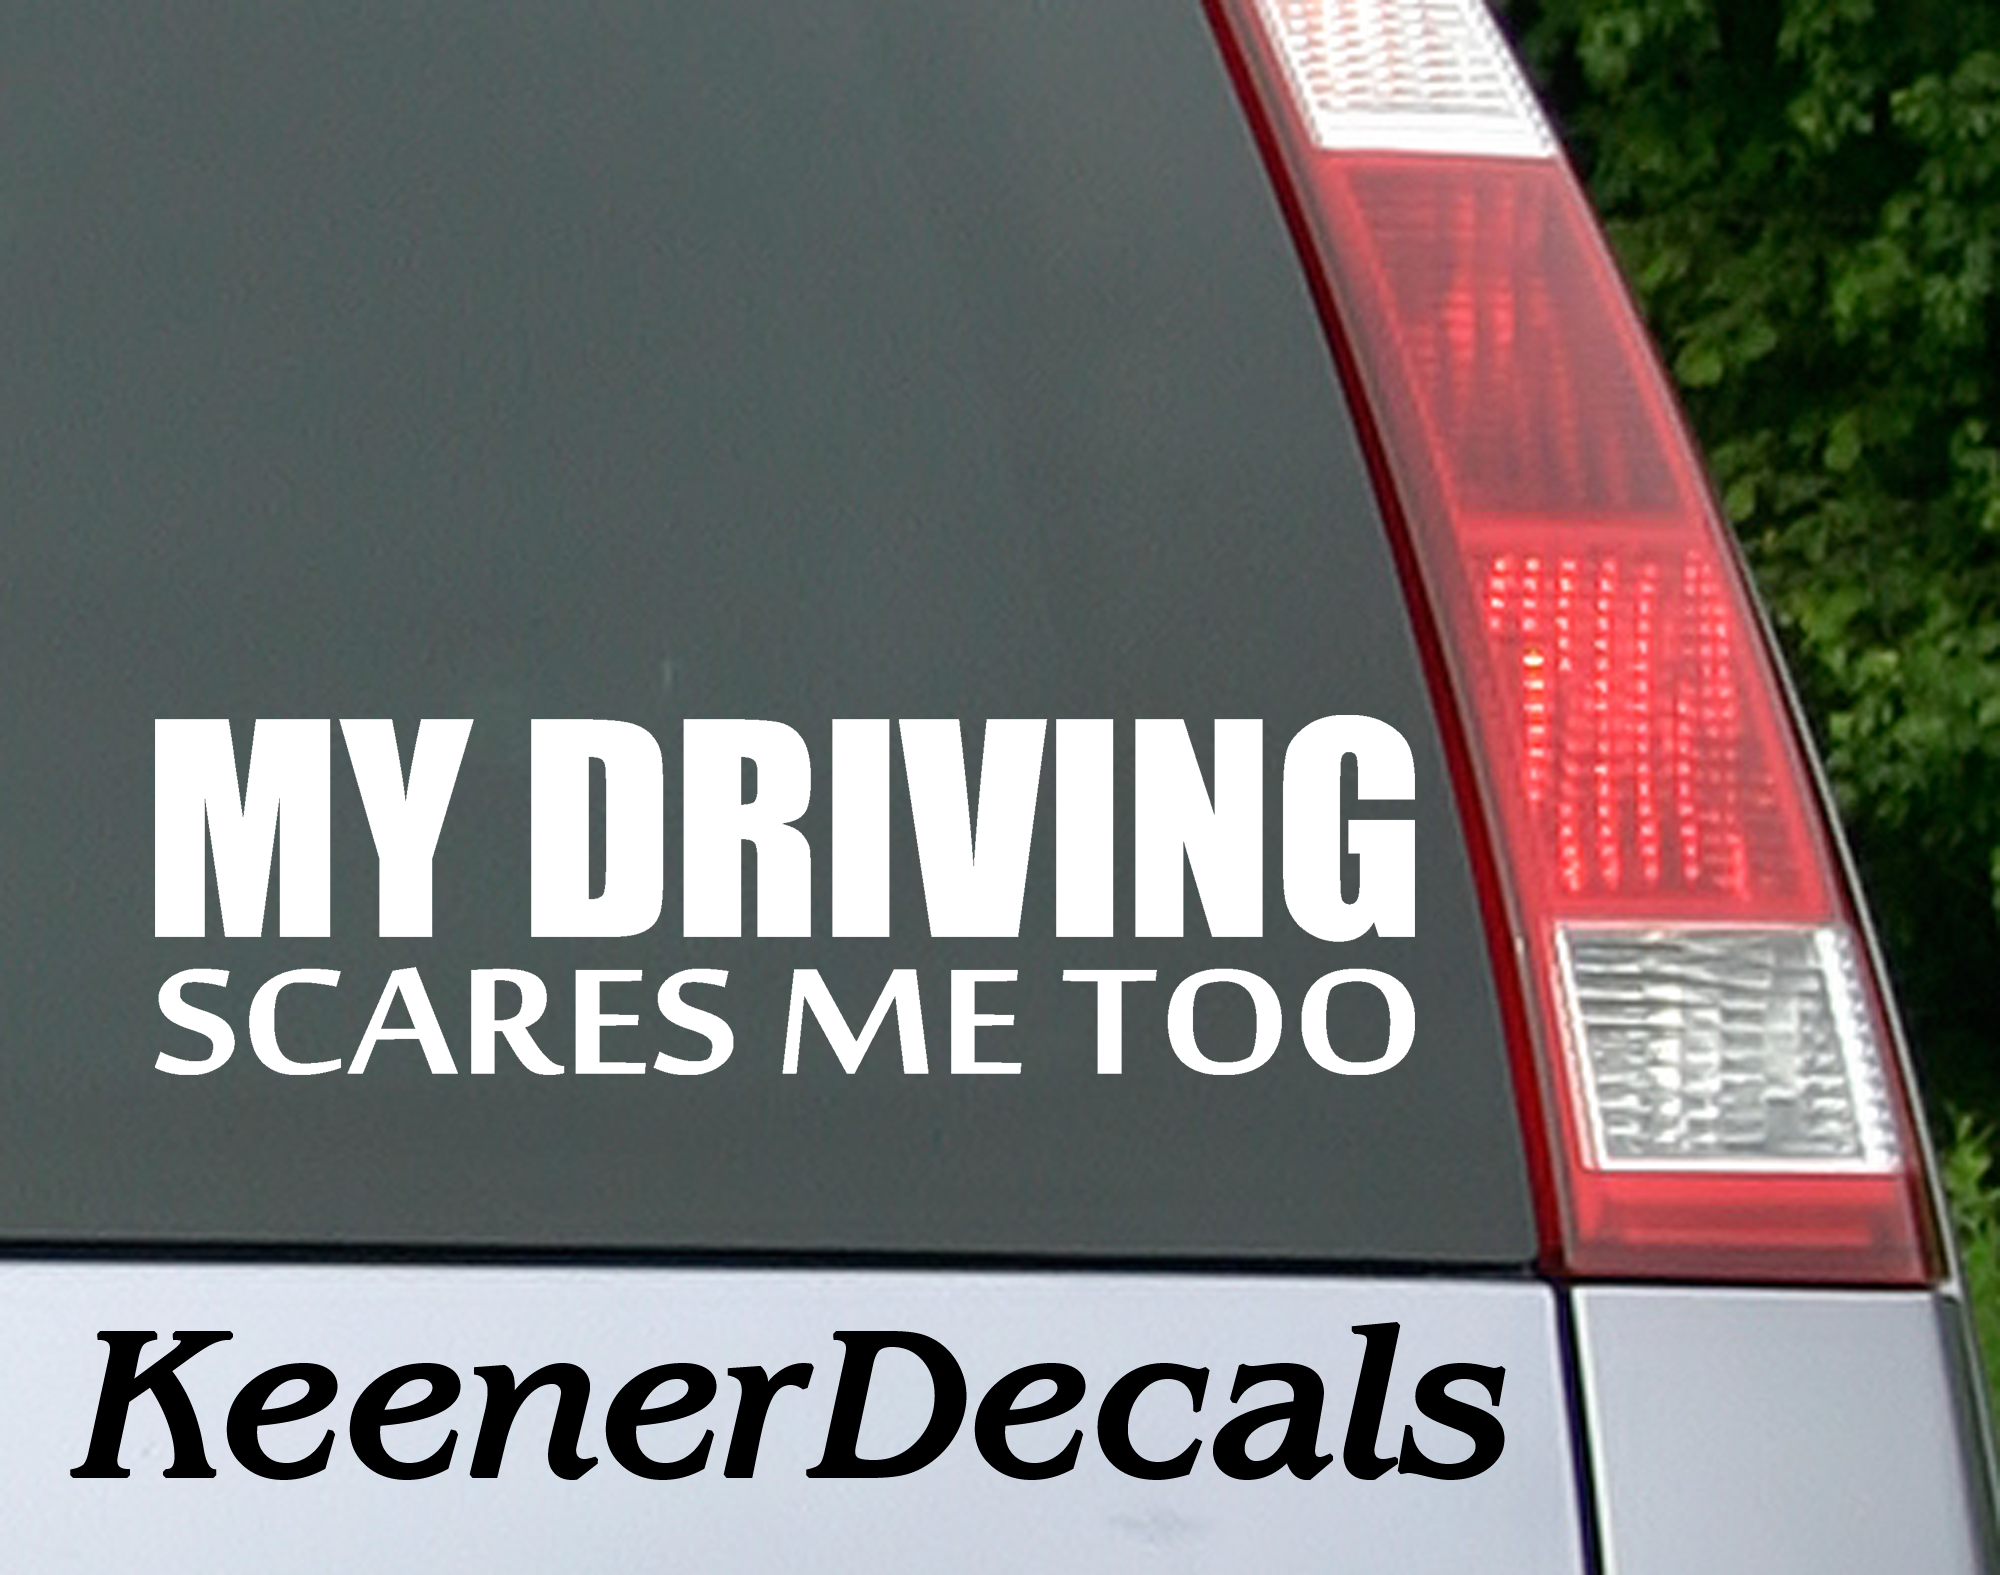 My Driving Scares Me Too White Vinyl Car Decal Bumper Sticker.  I mean let's be honest here.  7"W x 2"H